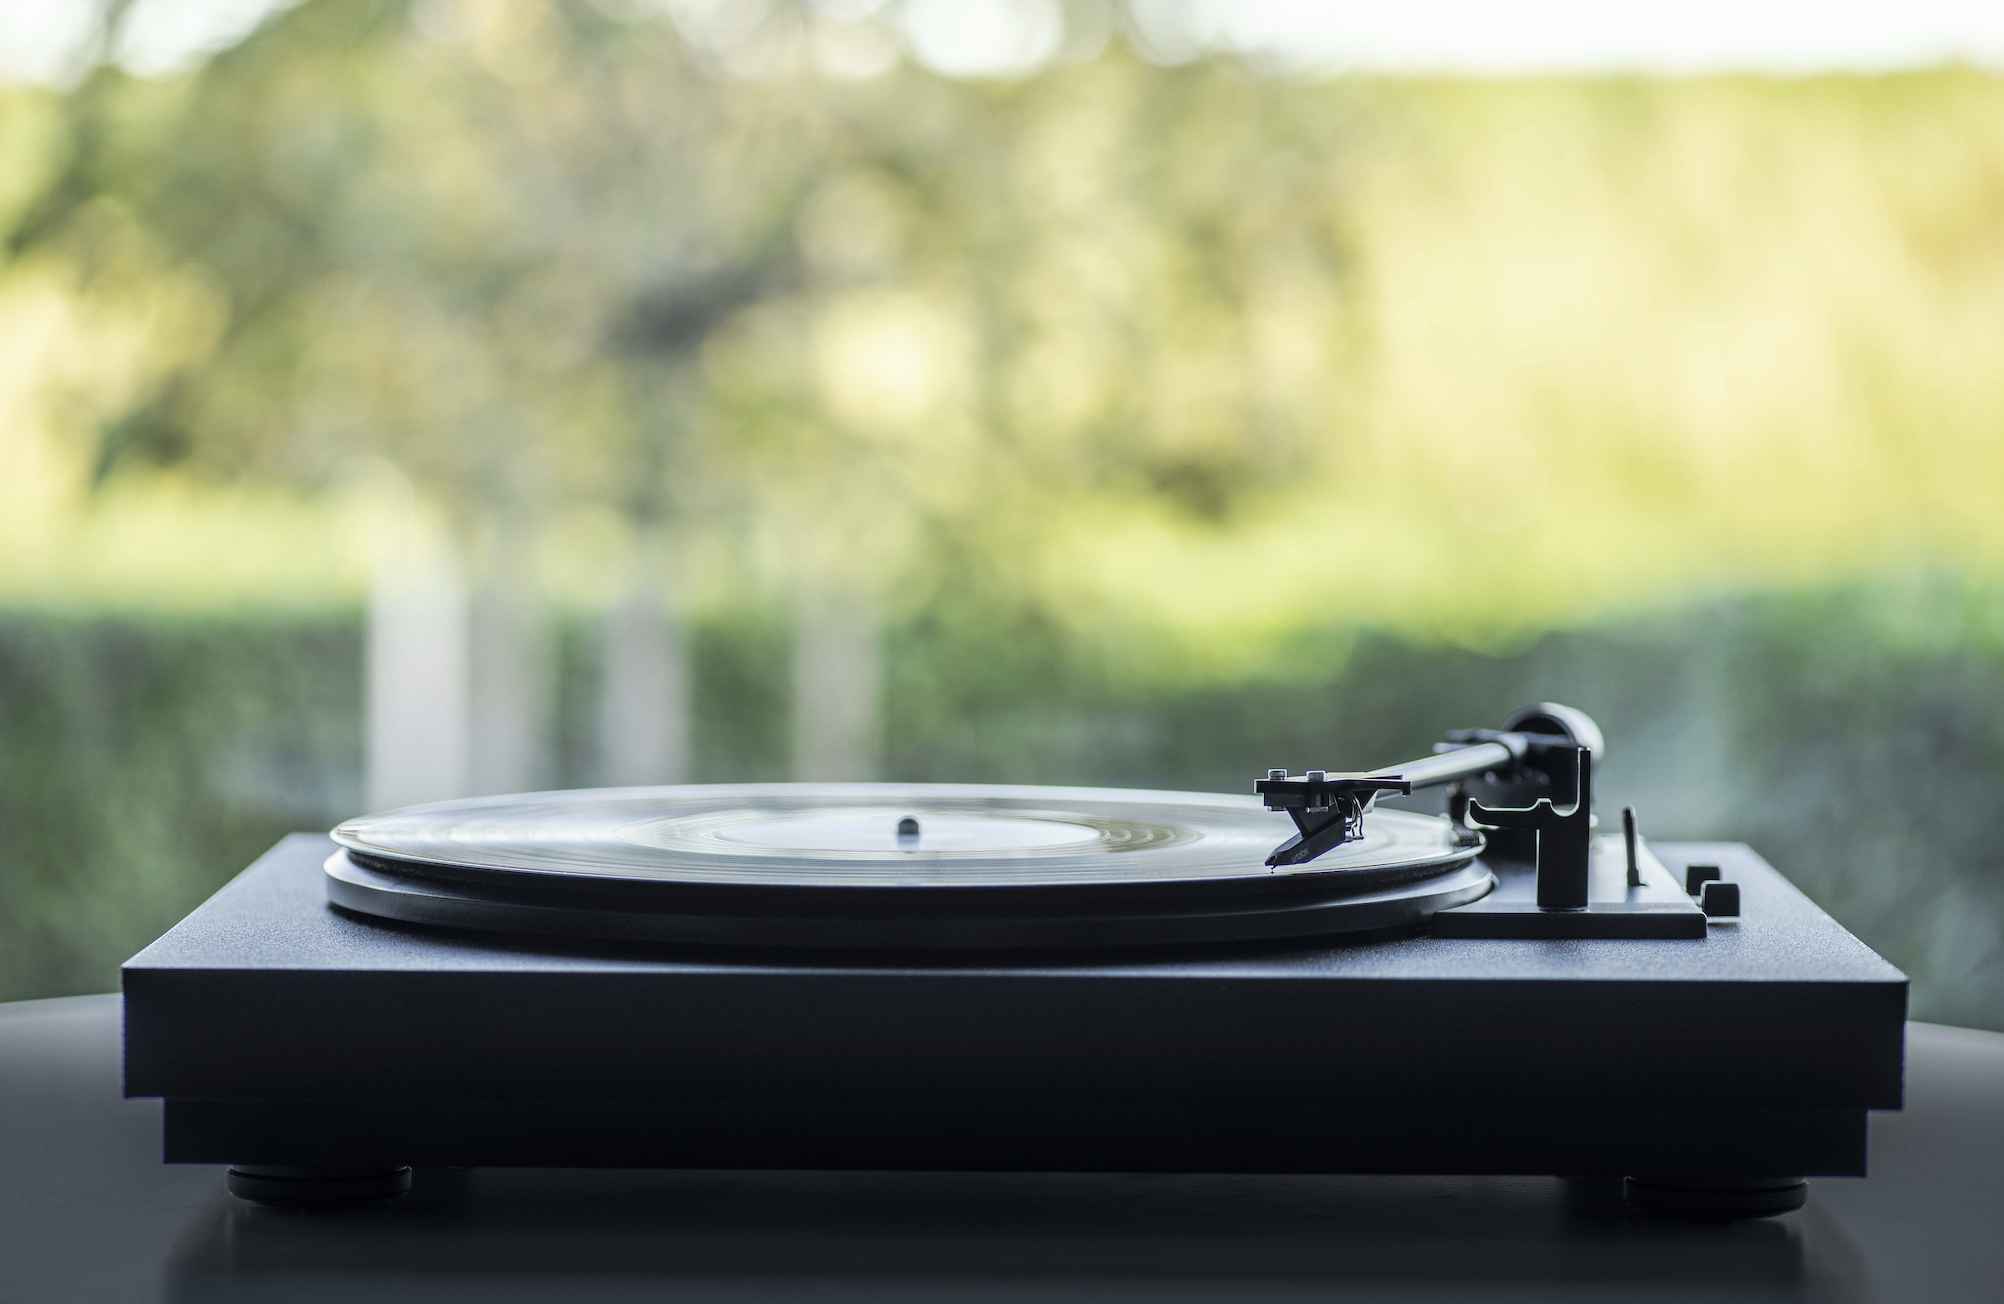 A1 Automatic Turntable From Pro-Ject